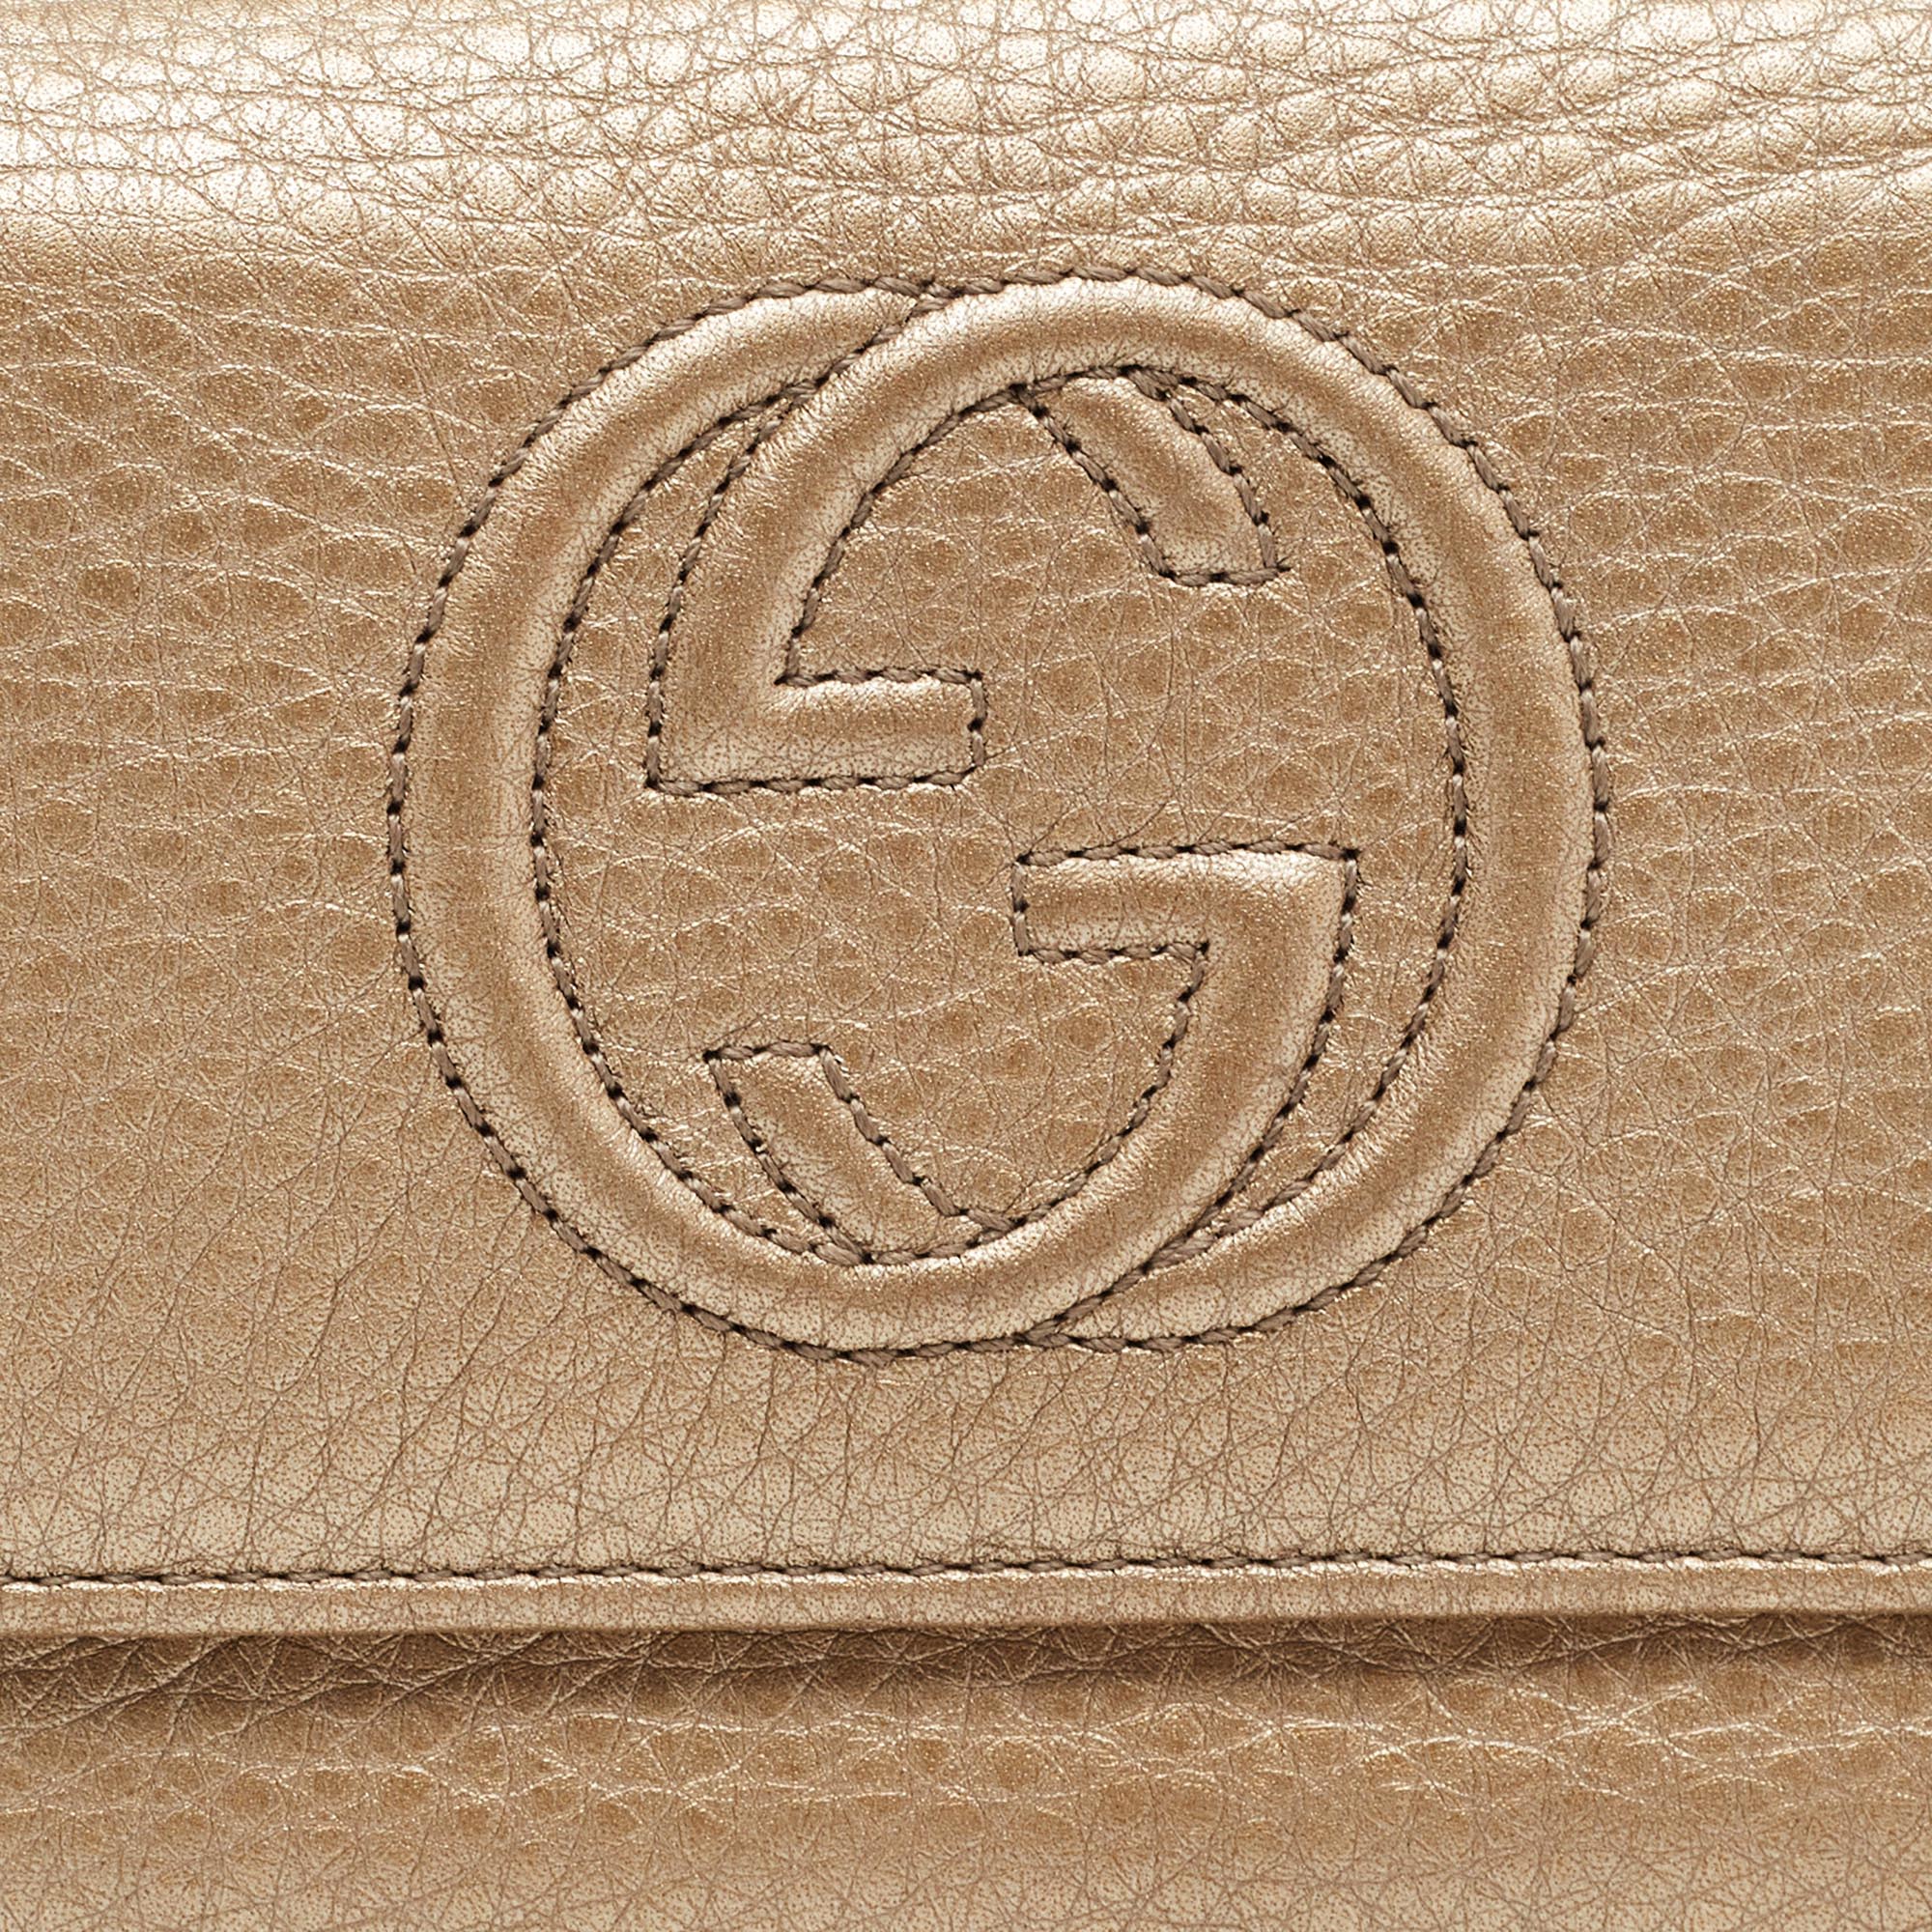 Gucci Gold Leather Soho Continental Wallet